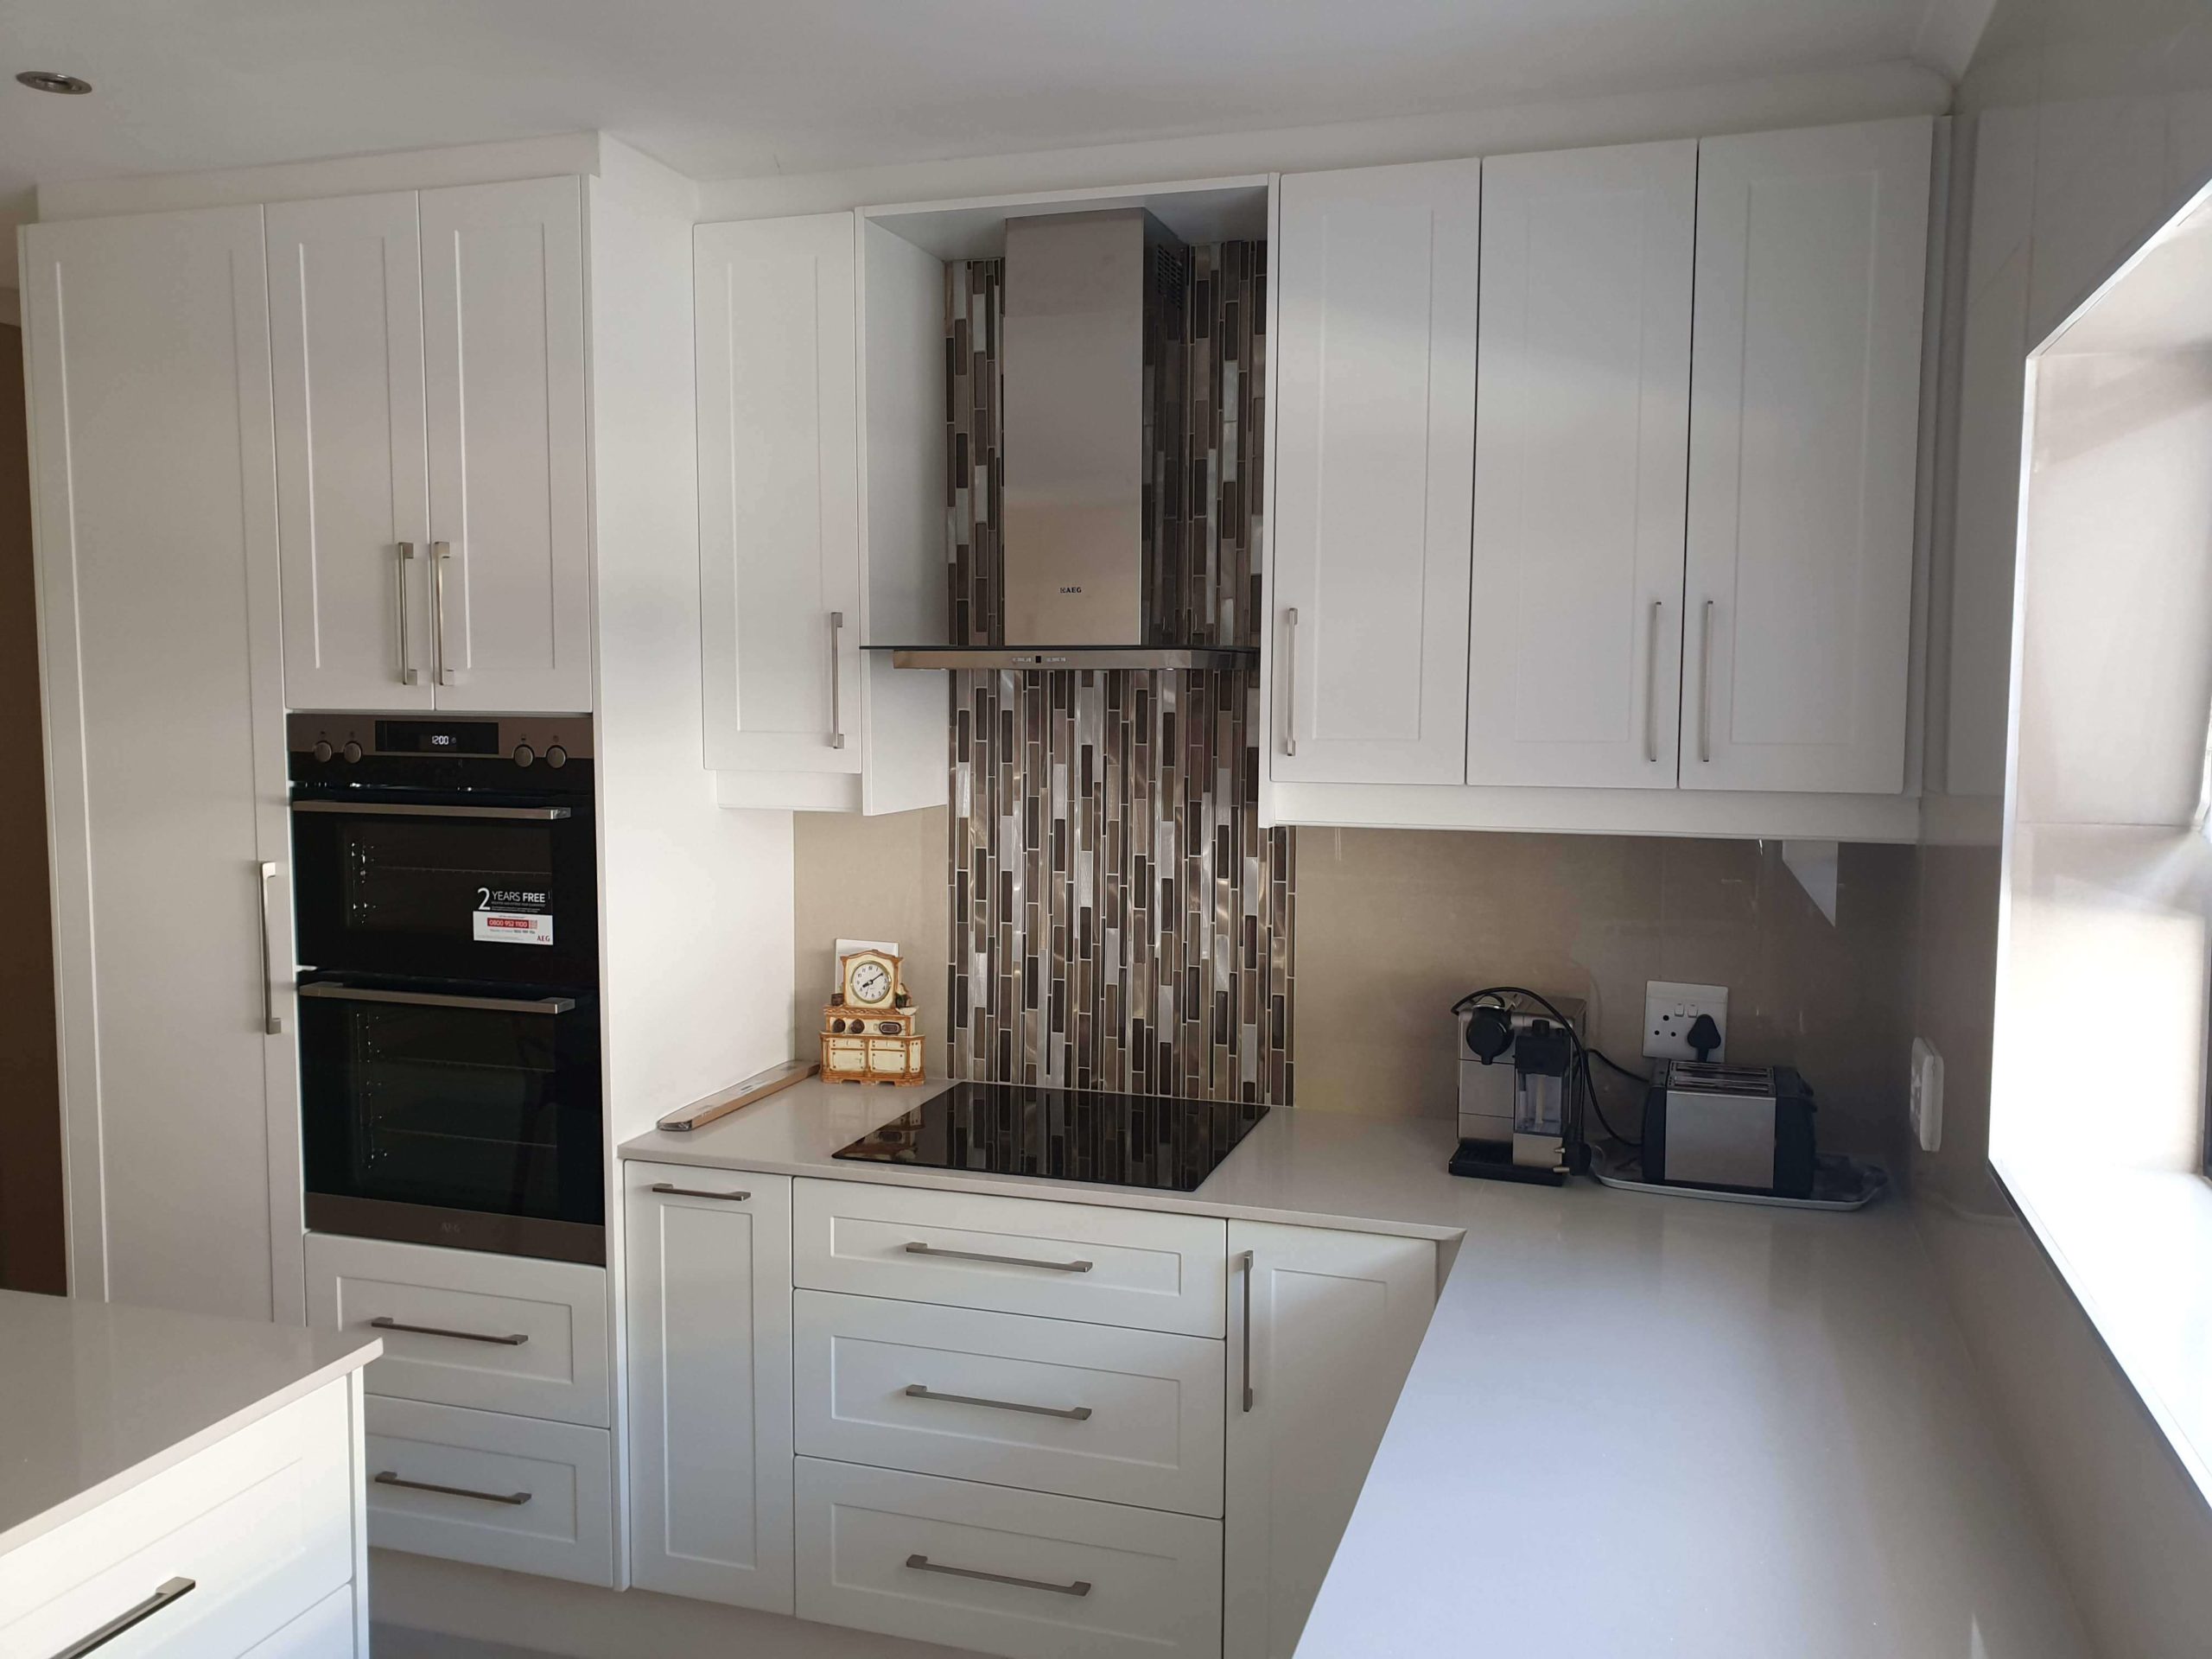 bespoke kitchen built out with white panel doors with a custom tile work